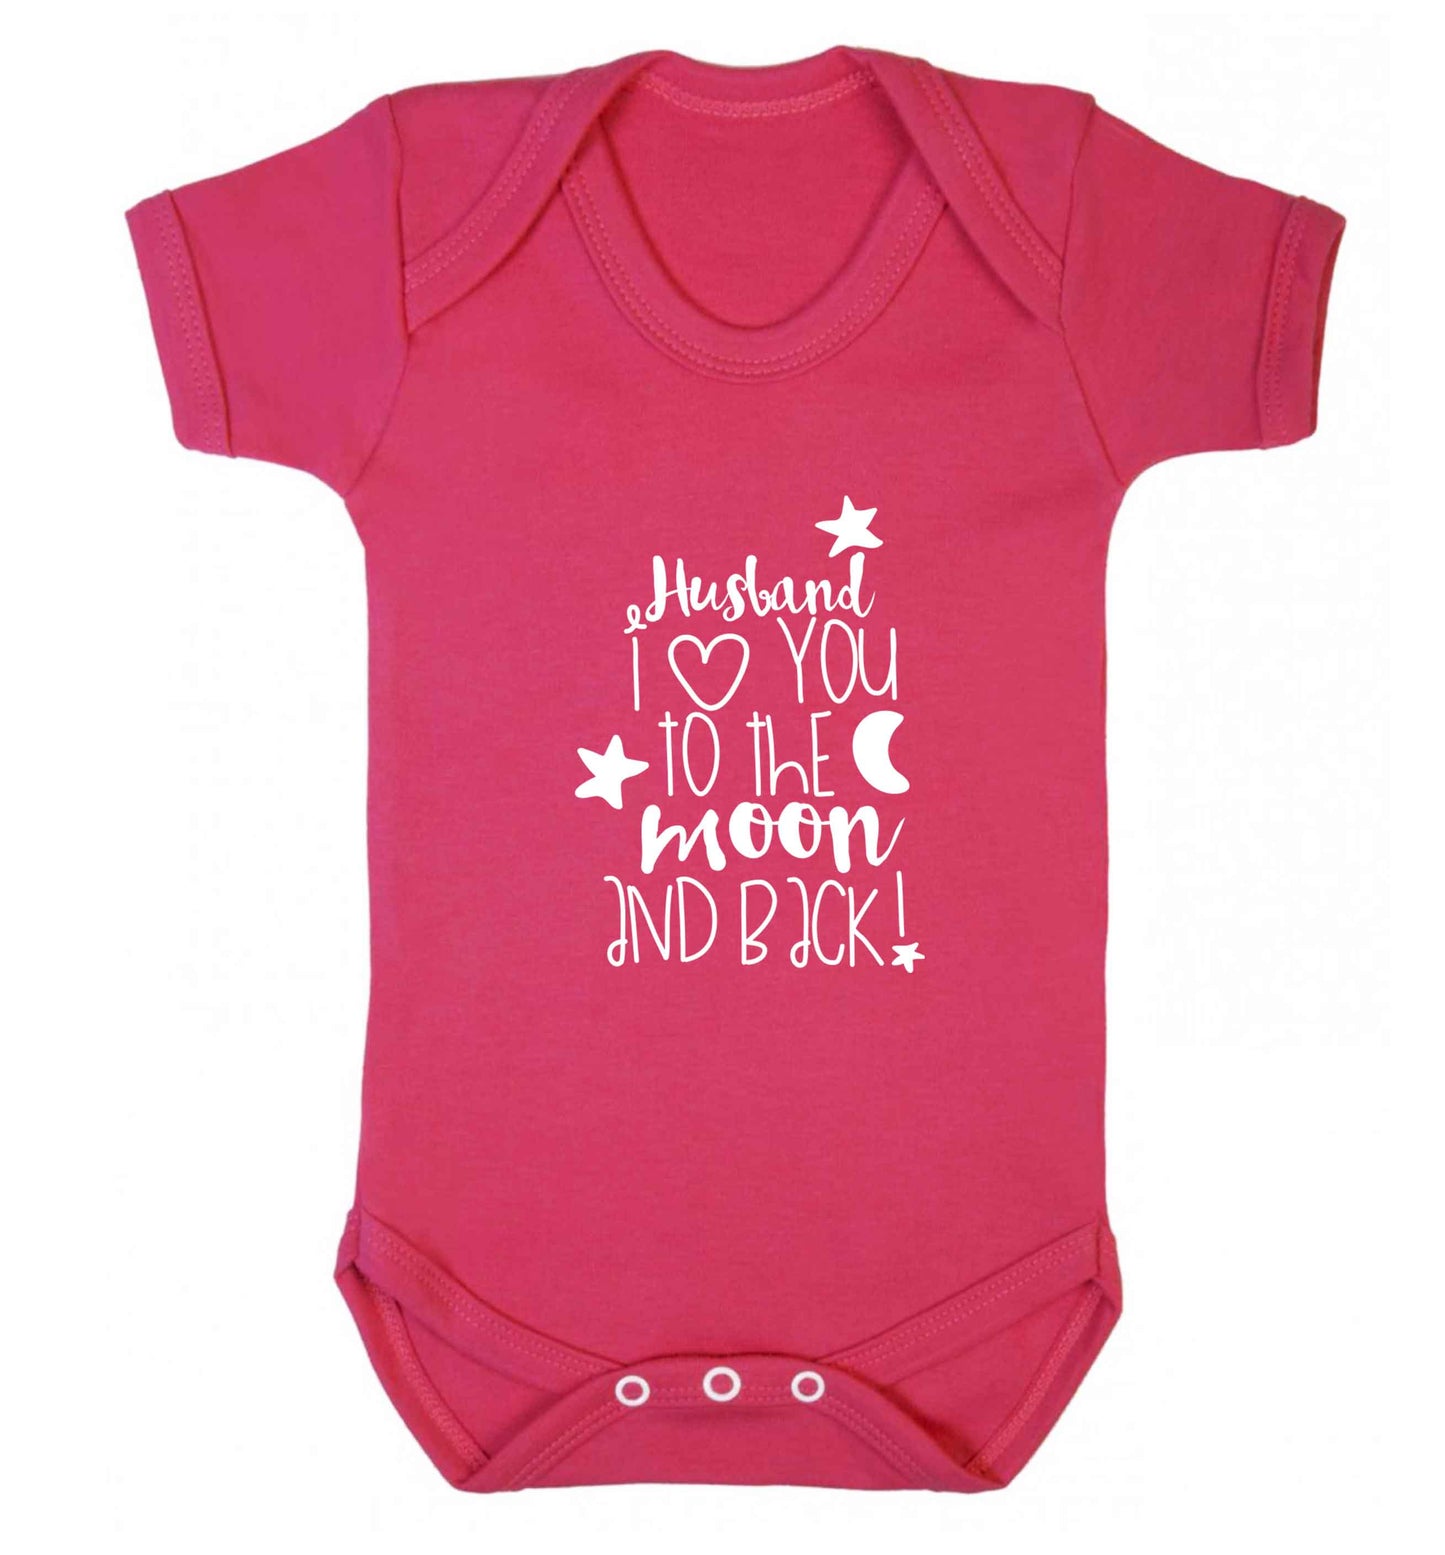 Husband I love you to the moon and back baby vest dark pink 18-24 months